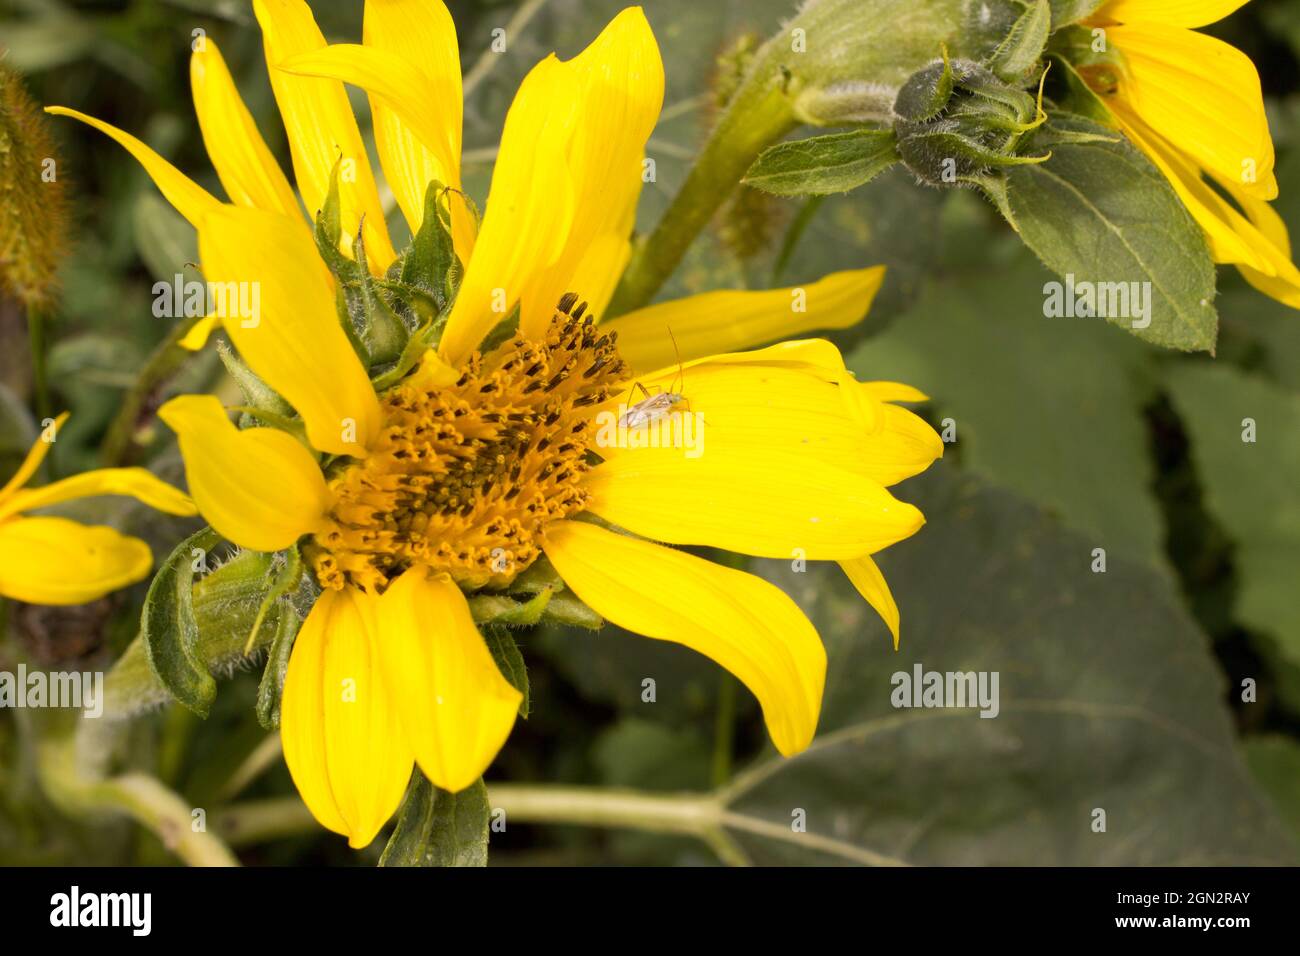 Detail of sunflowers with miridae plant bugs Stock Photo